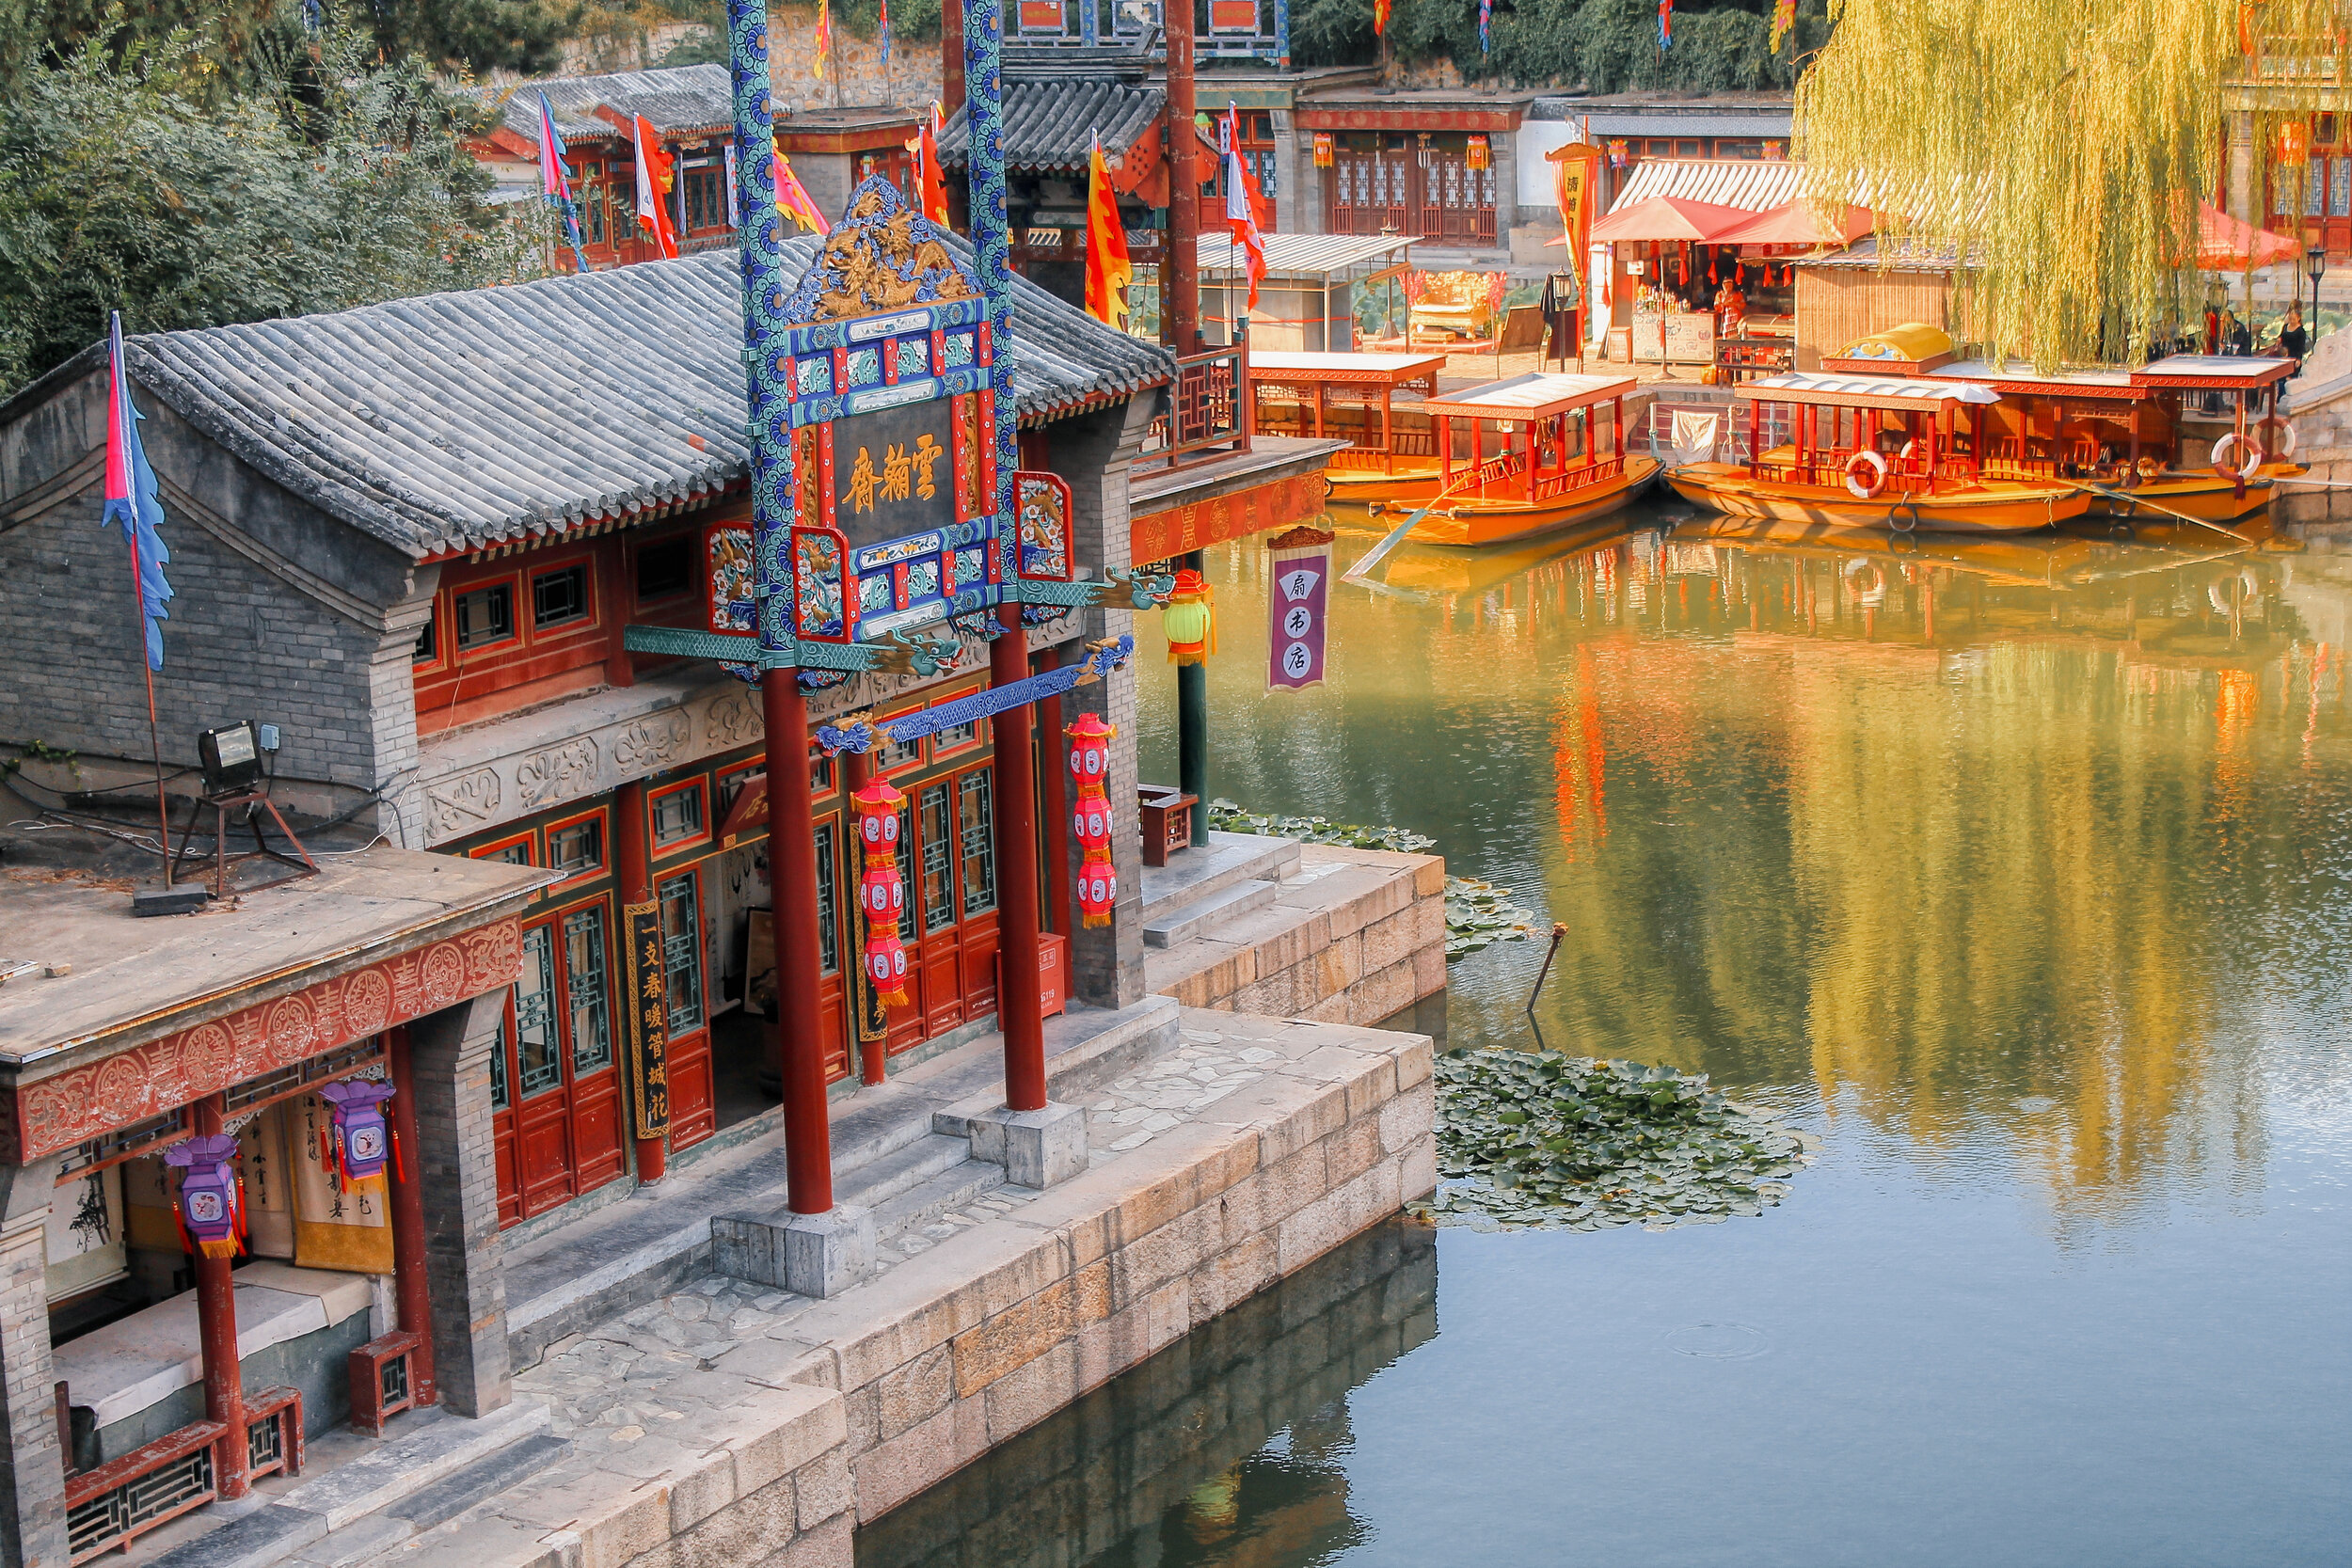   Summer Palace, Beijing, China (ISO 100, 40 mm,  f /5.0, 1/80 s)  